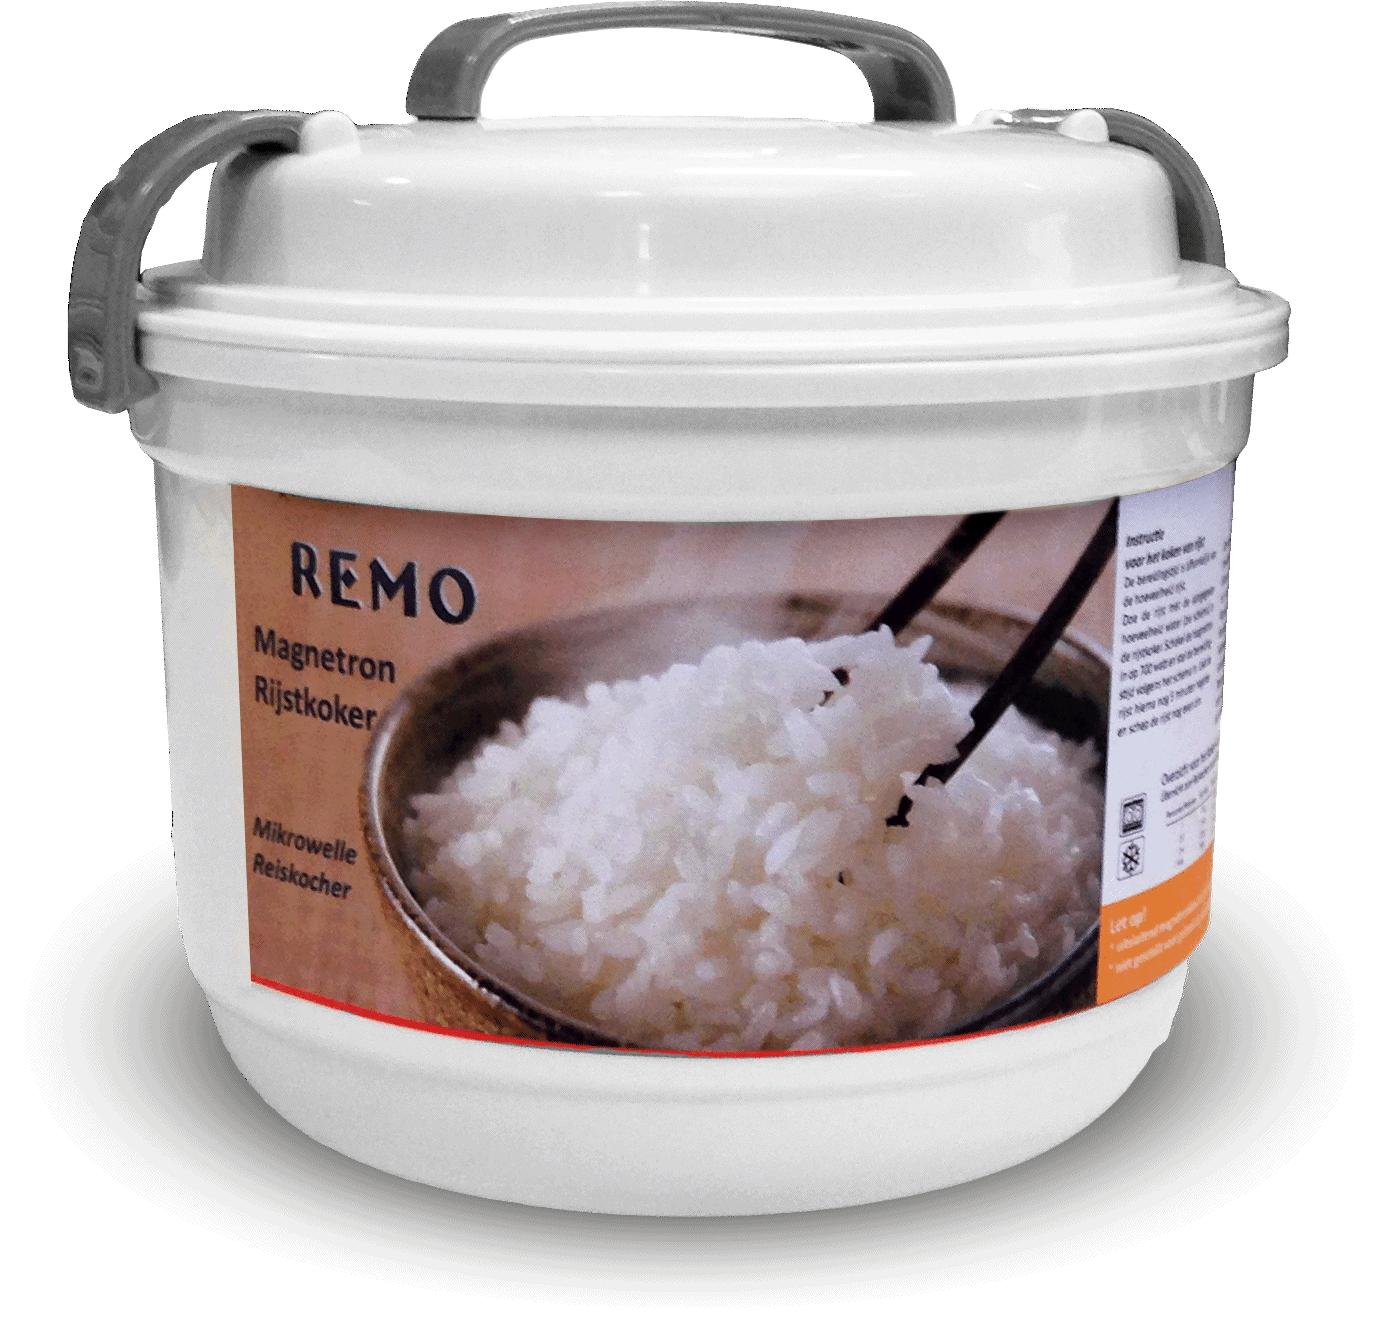 Microwave rice cooker Remo 0